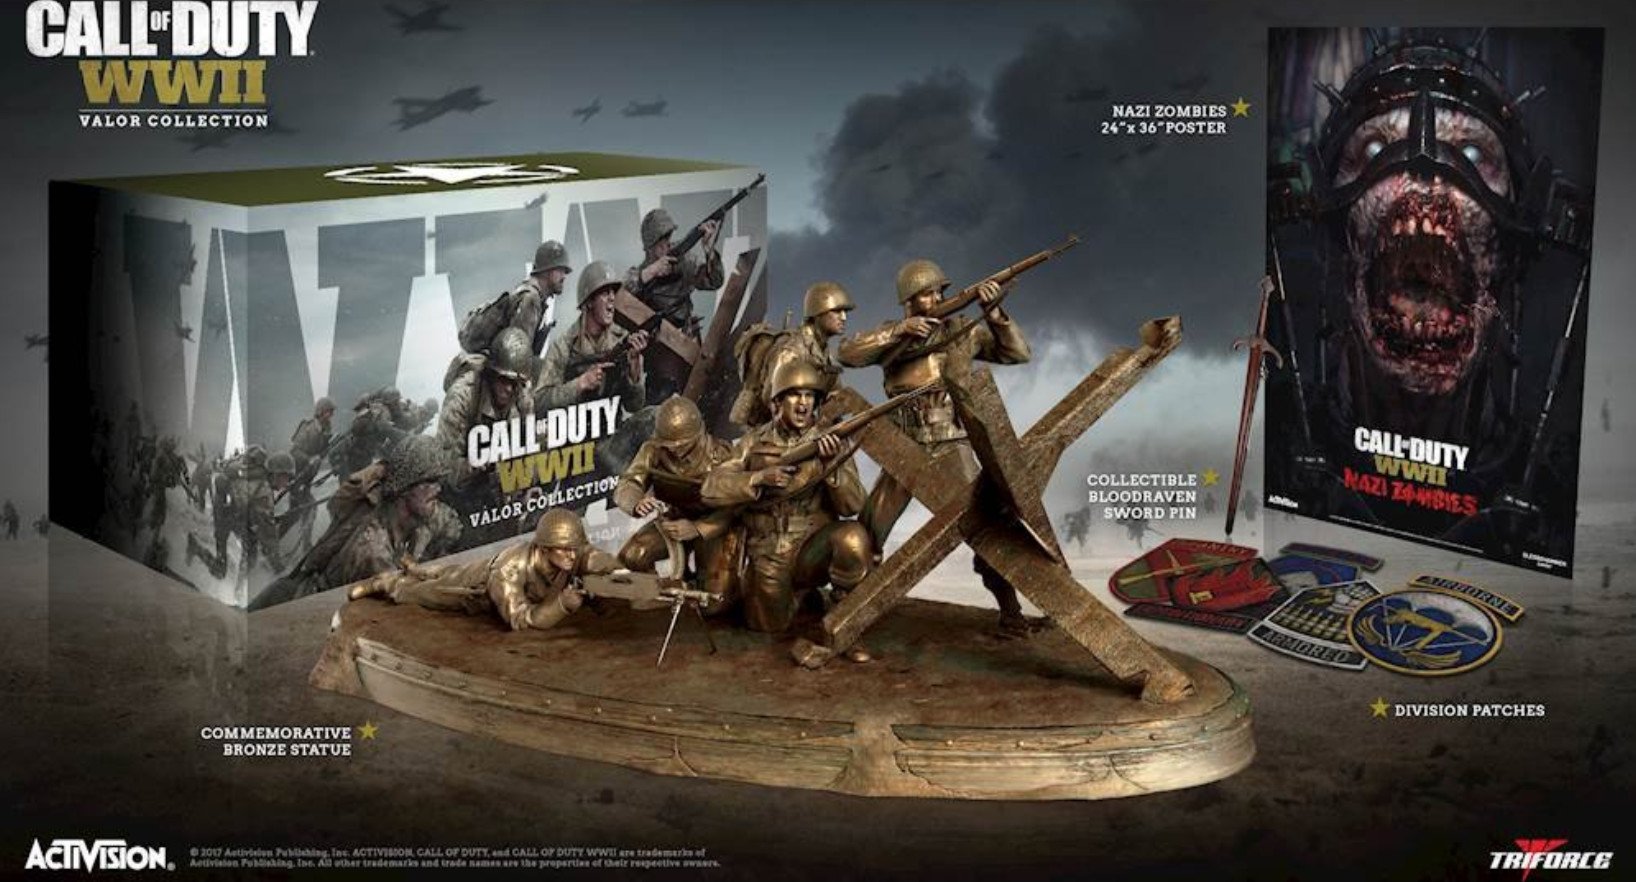 call of duty collectors edition